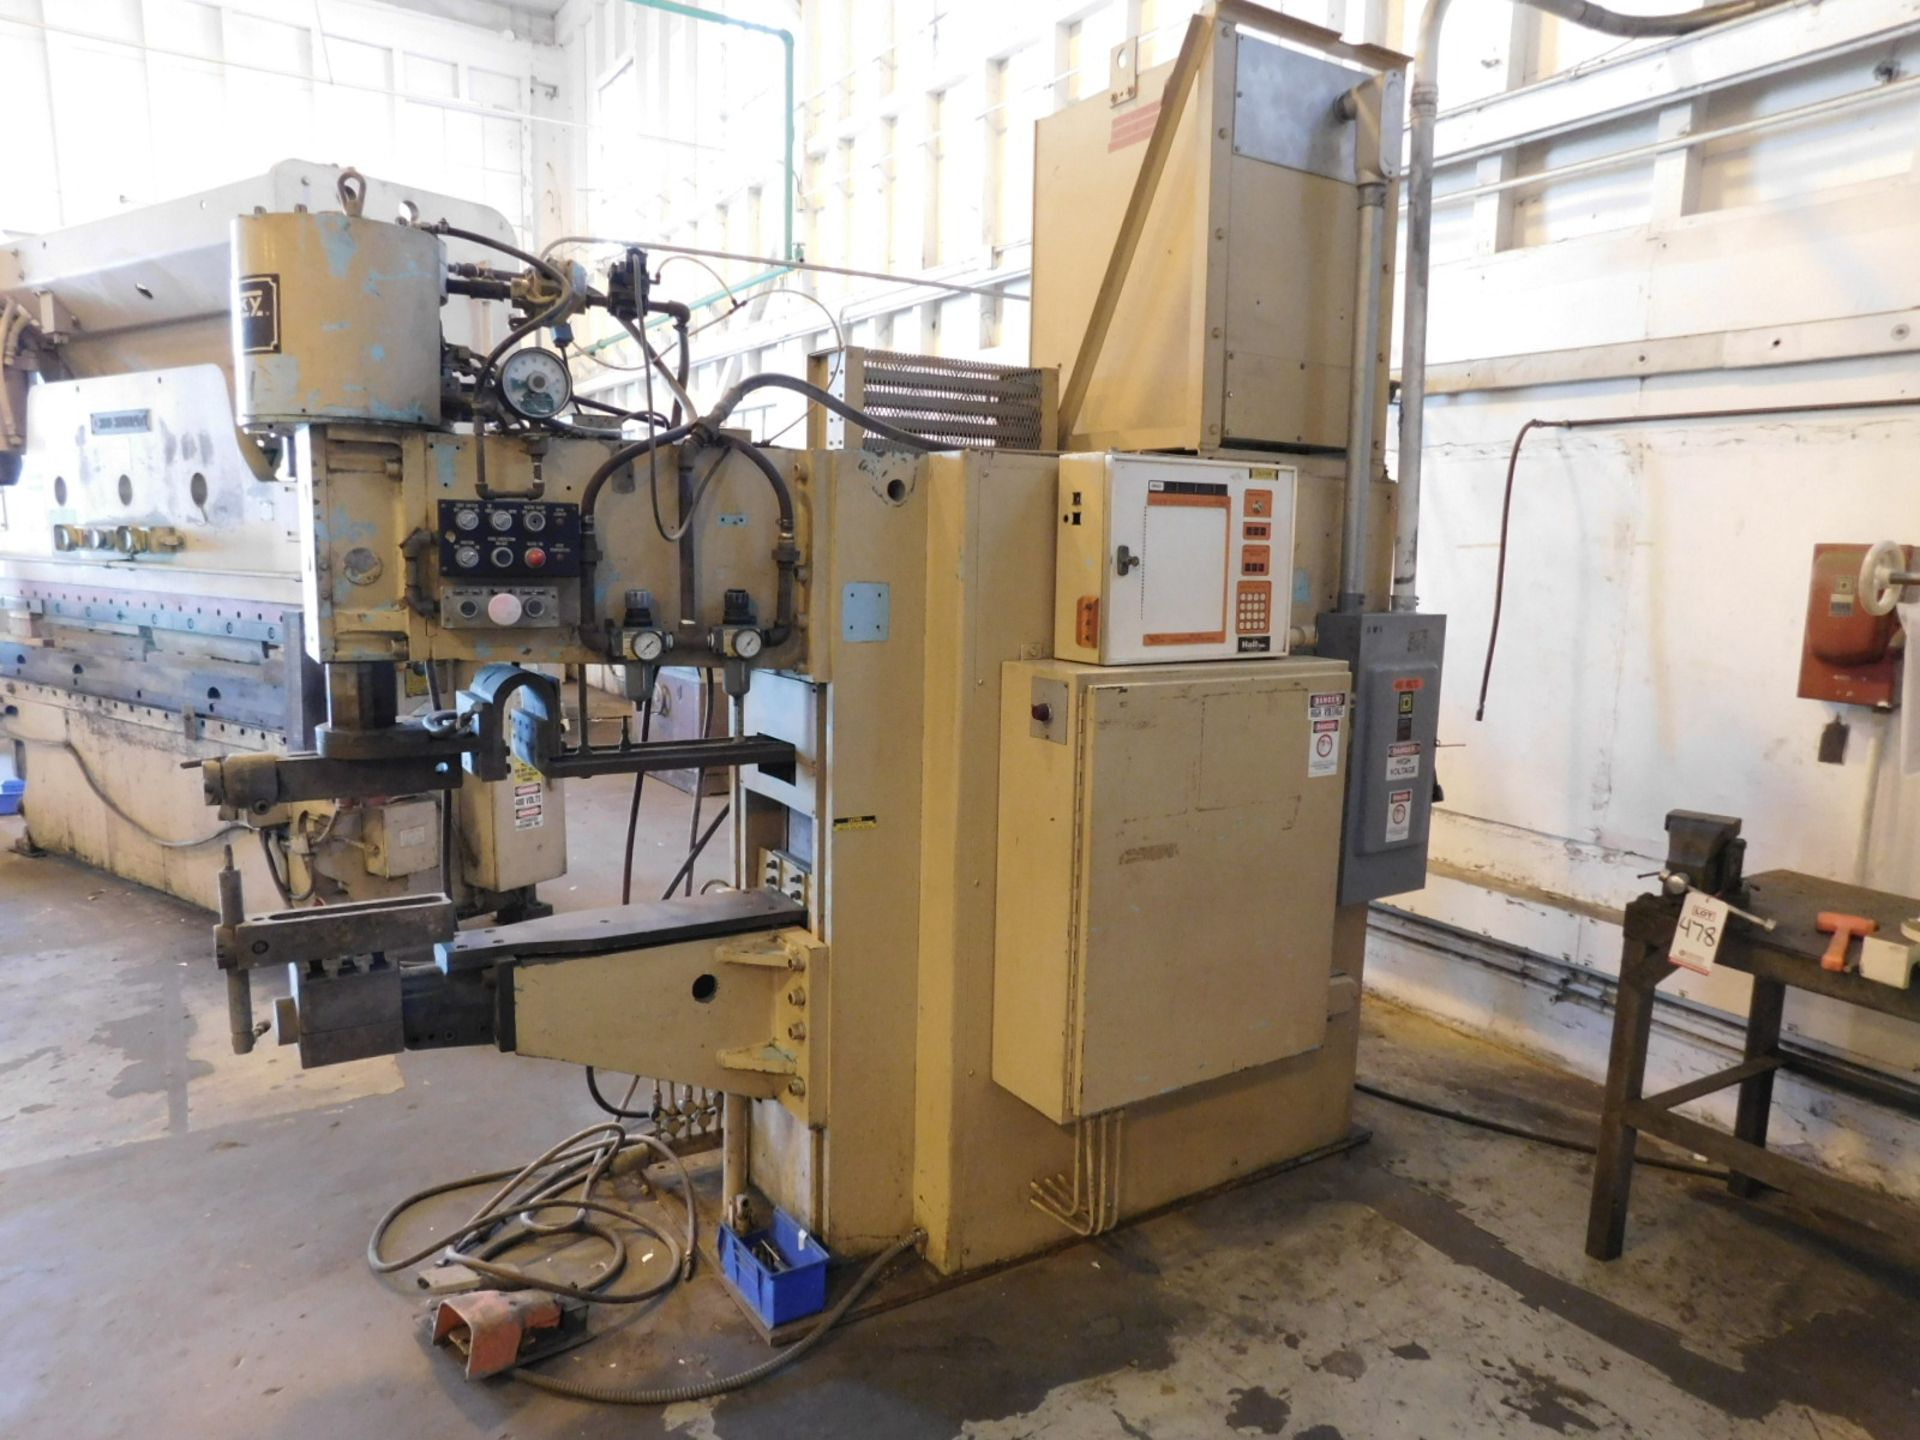 SCIAKY SPOT WELDER TYPE PMC03STICN, S/N 10589, 440V, 3-PHASE, 150 KVA, 10" X 36" THROAT - Image 2 of 3